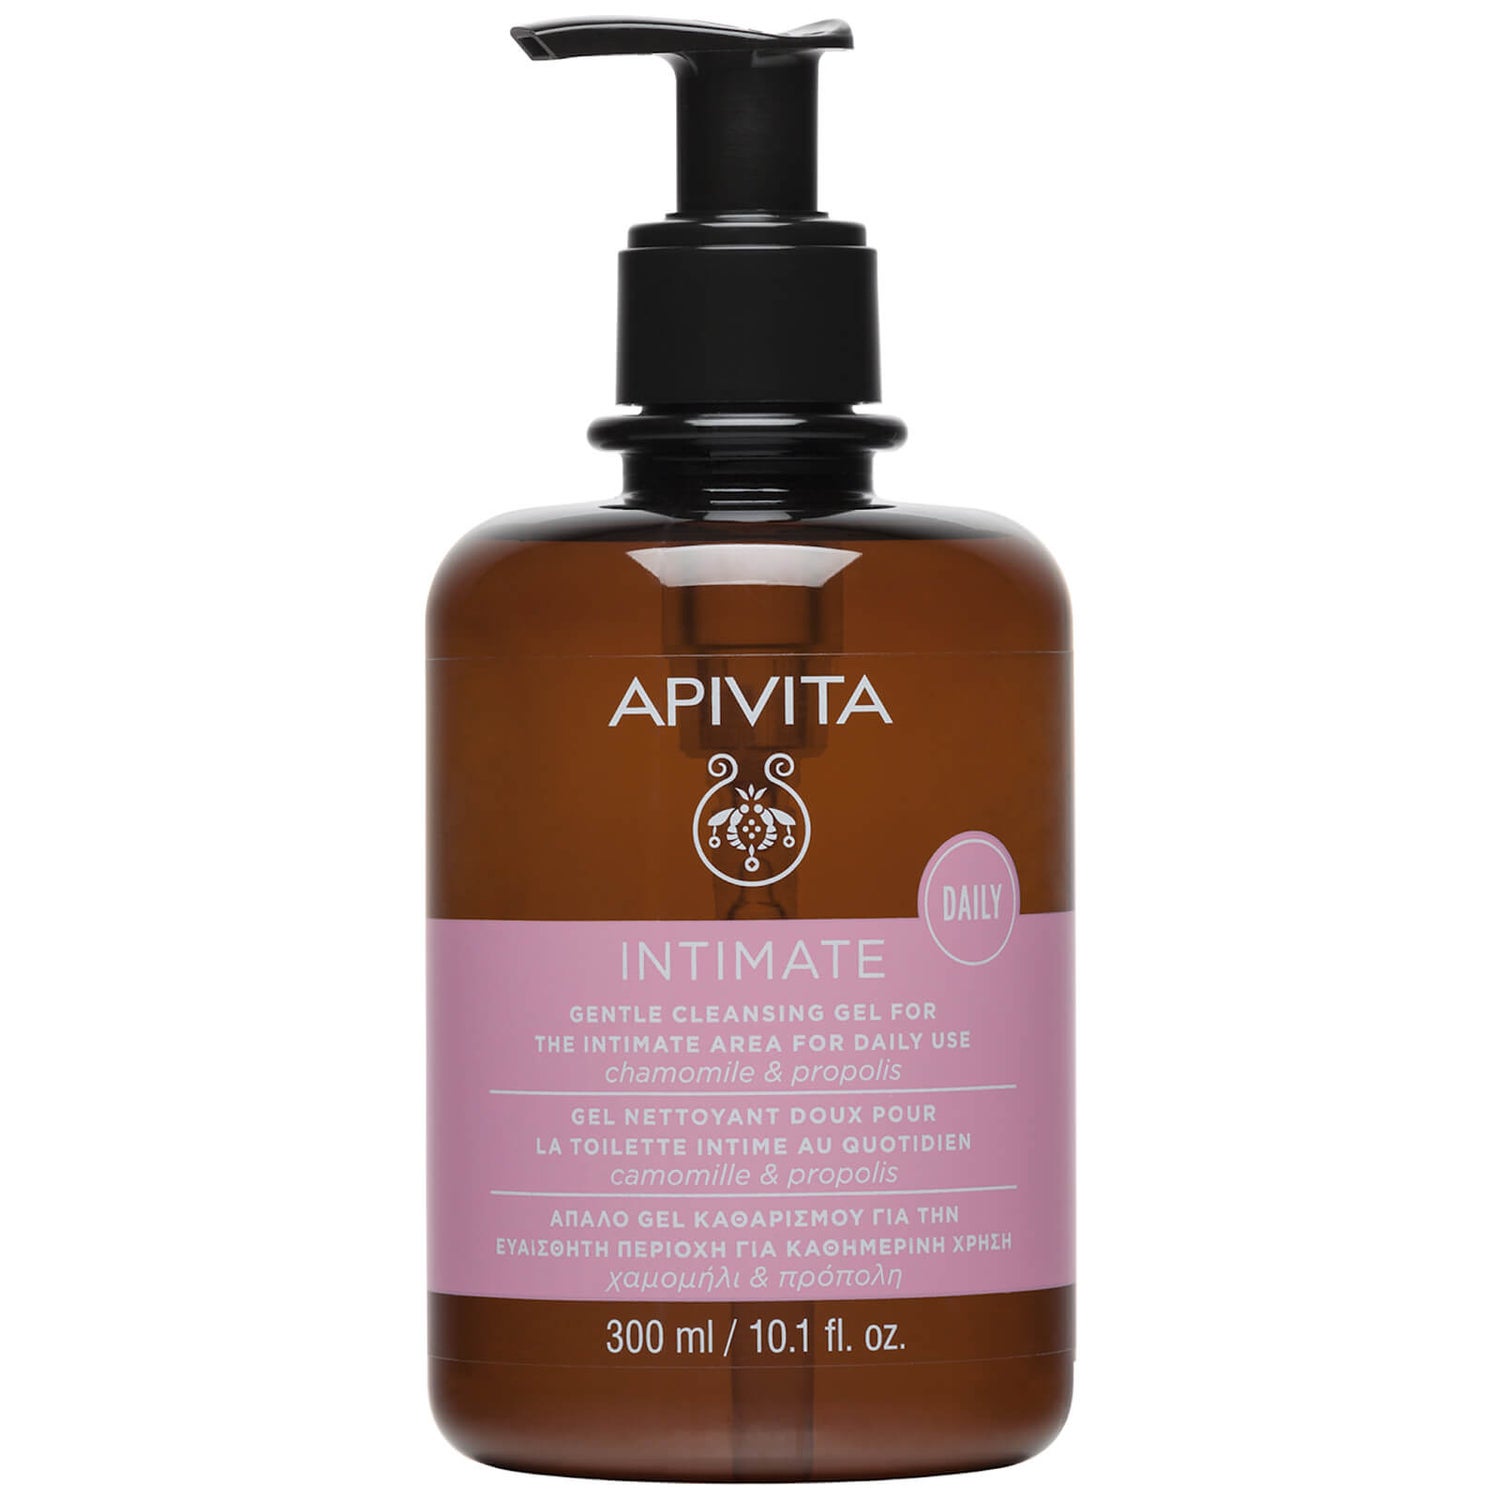 APIVITA Intimate Daily Gentle Cleansing Gel for the Intimate Area 10.1 fl. oz